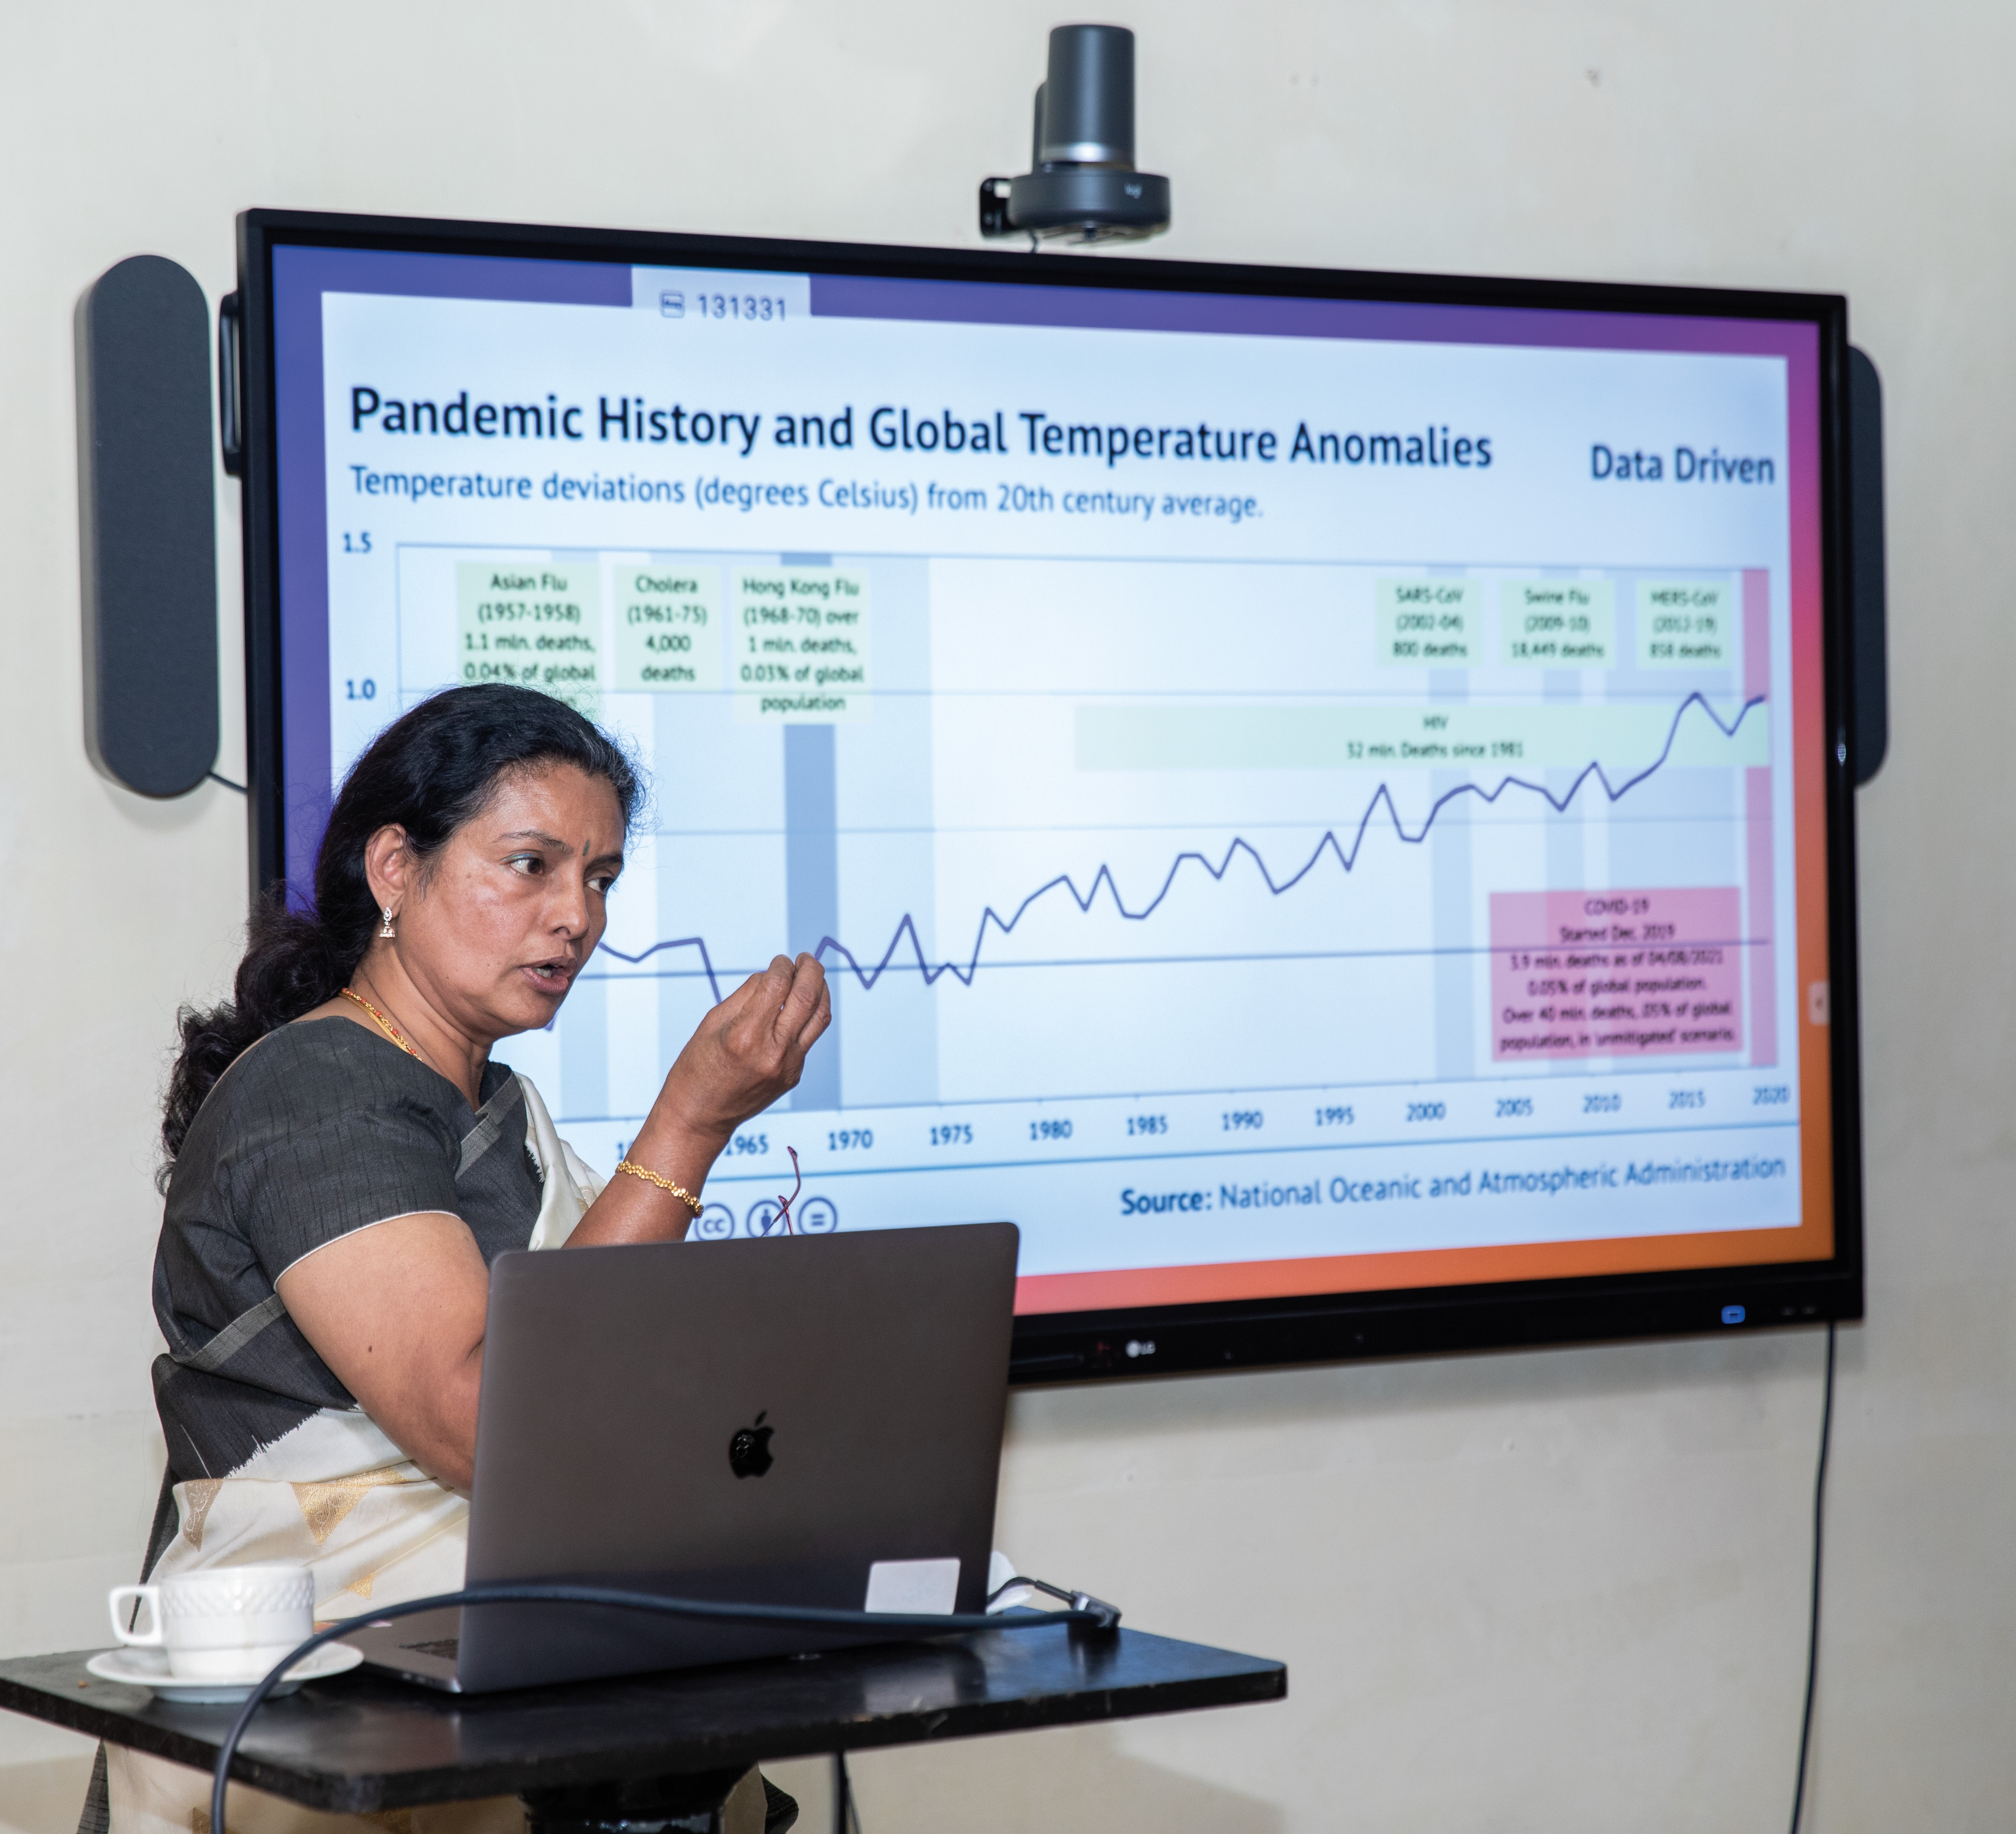 A woman gives a lecture with presentation in background.